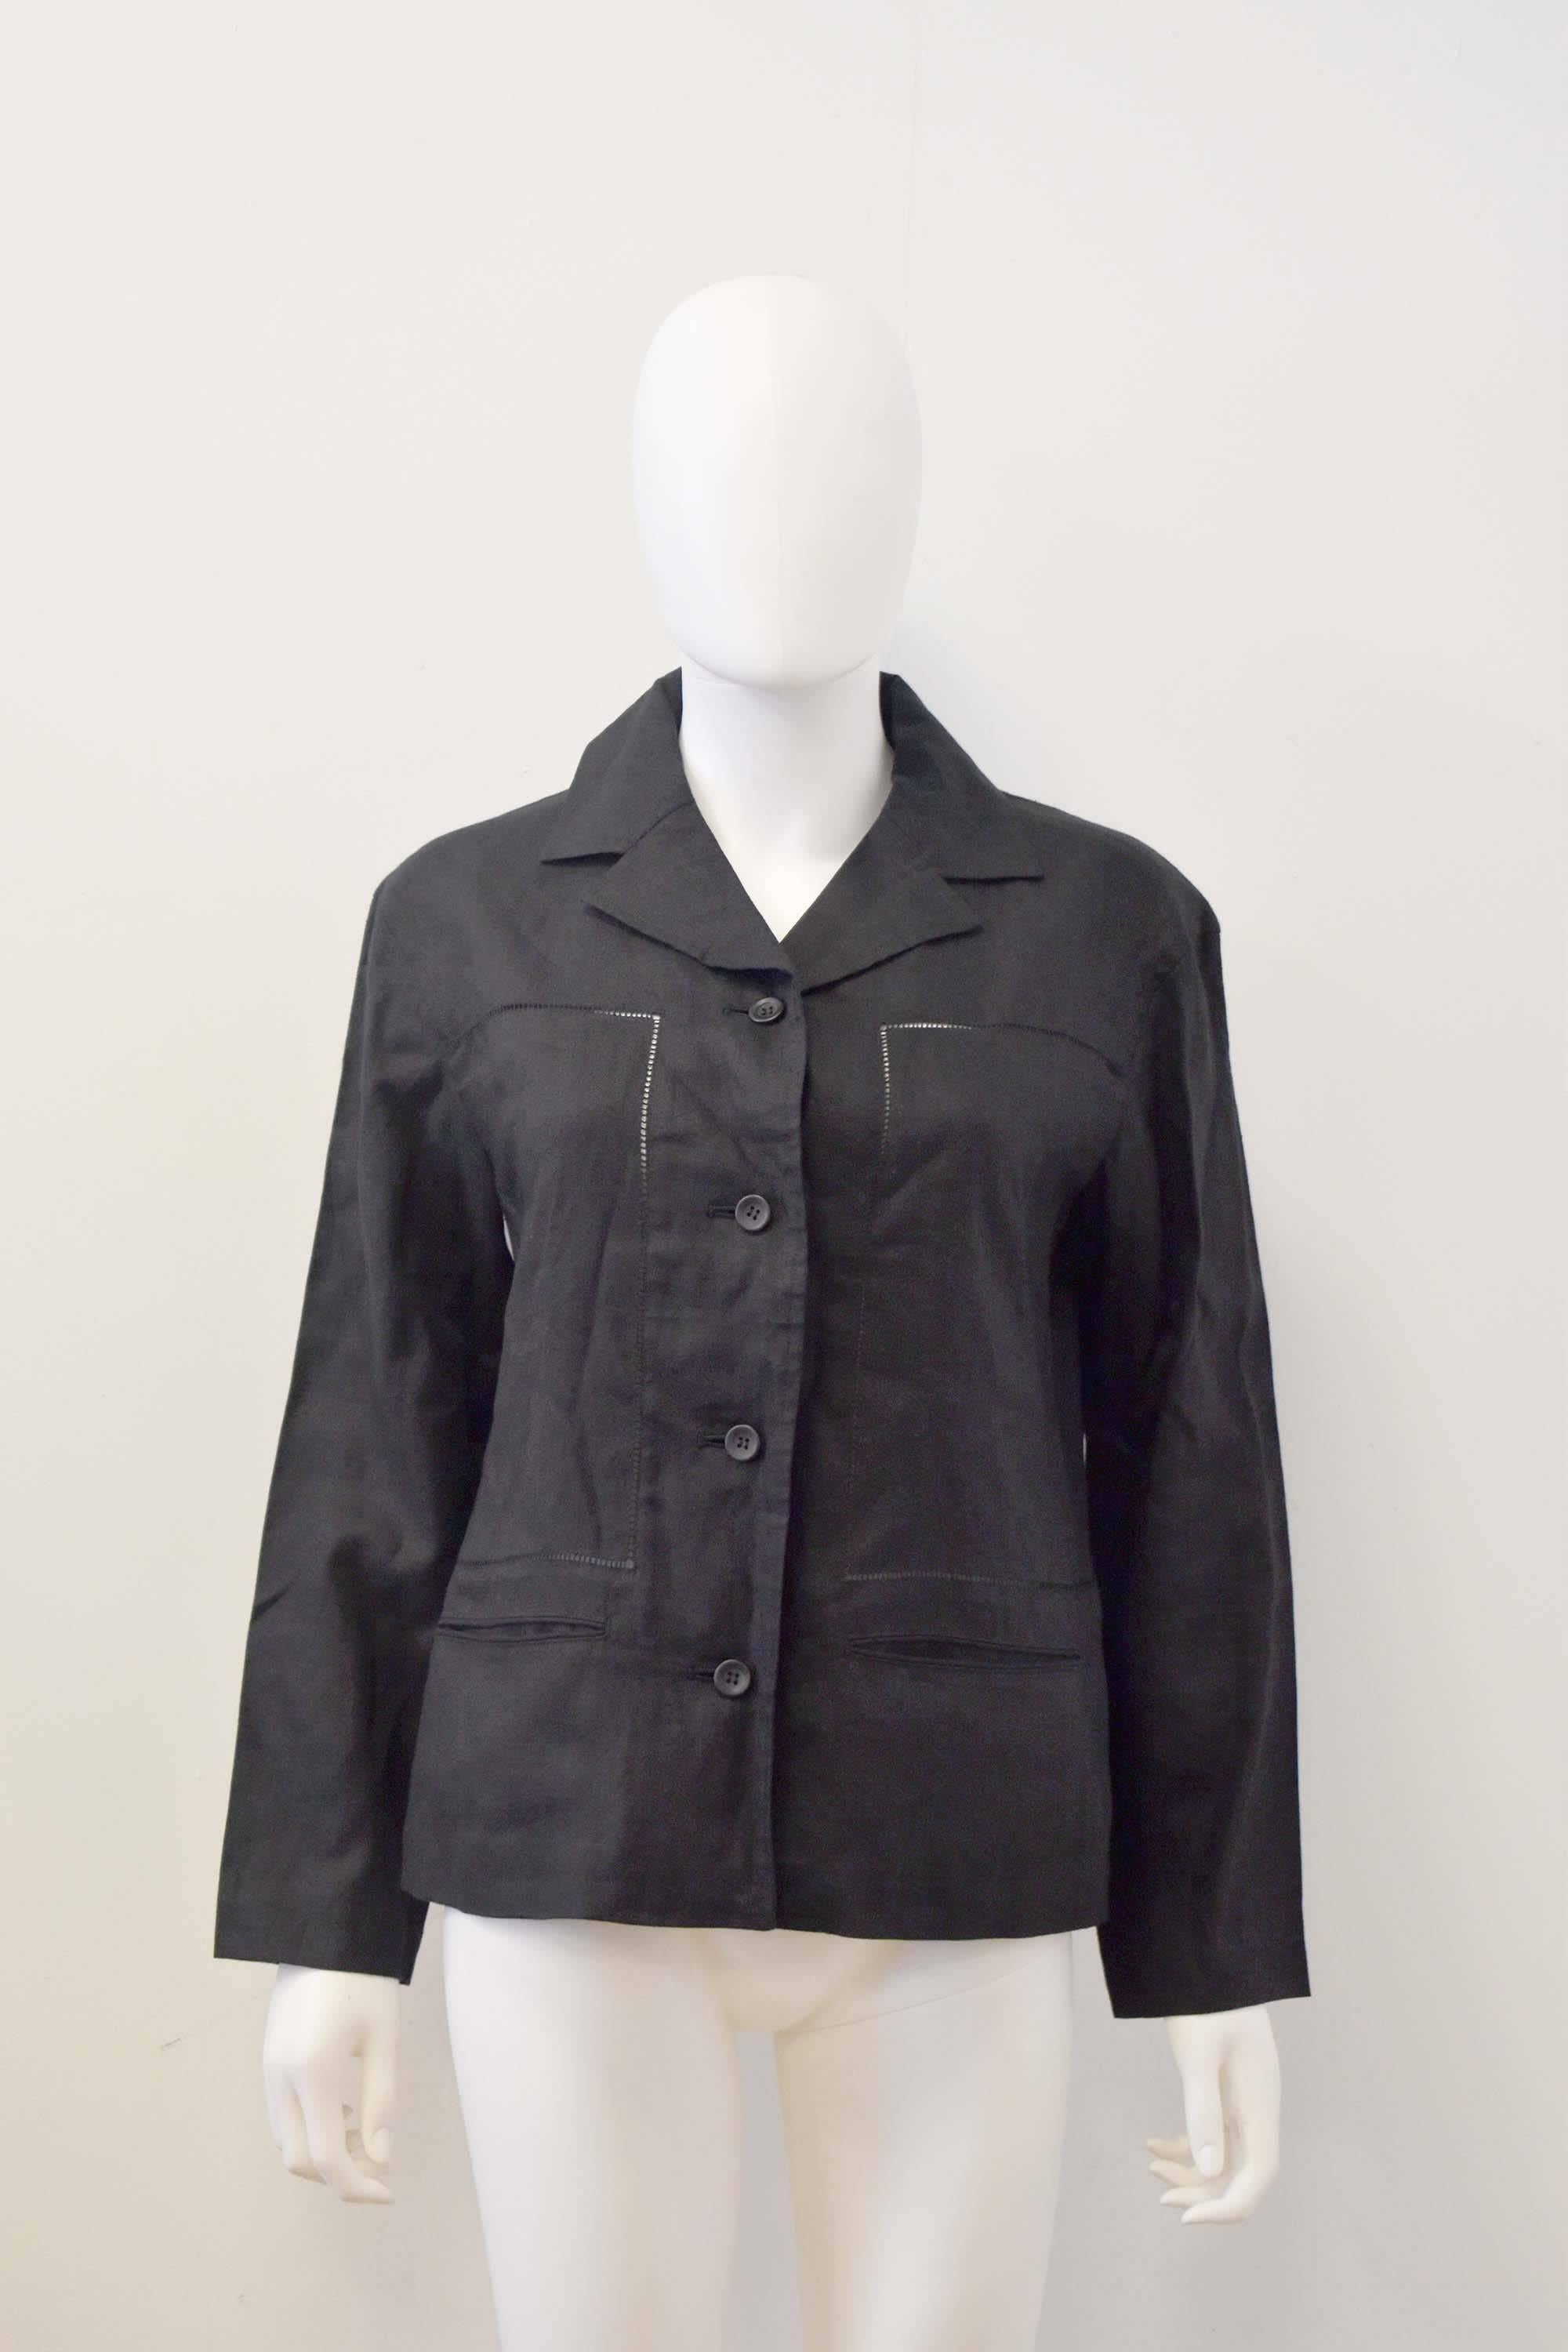 Black linen jacket from Issey Miyake’s mainline collection. The jacket has a cropped, boxy shape with a notched collar, button fastenings and two pockets at the hip. The jacket has fagotted panels along the front and centre back seam. The jacket is